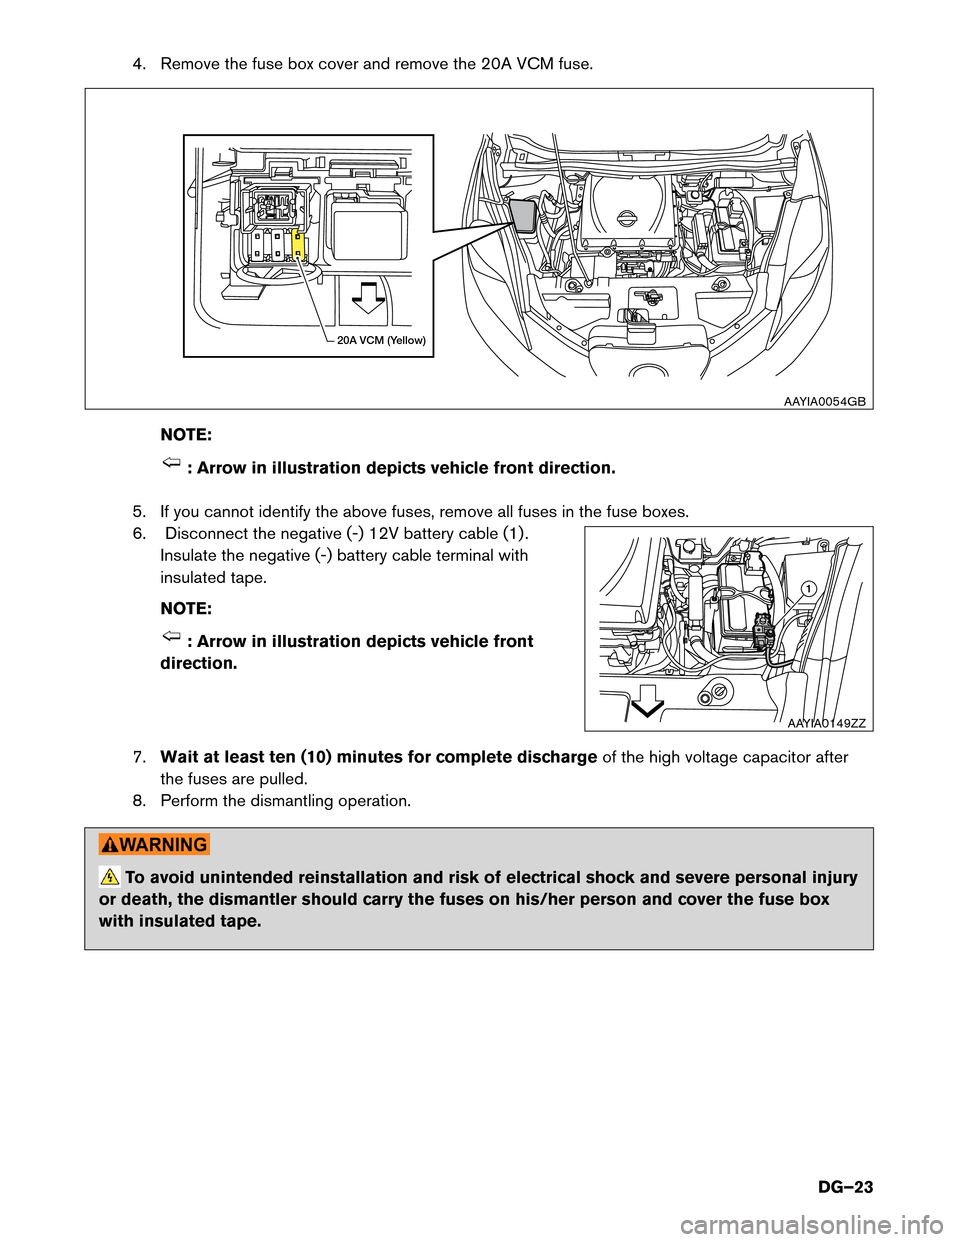 NISSAN LEAF 2015 1.G Dismantling Guide 4. Remove the fuse box cover and remove the 20A VCM fuse.
NO TE: : Arrow in illustration depicts vehicle front direction.
5.

If you cannot identify the above fuses, remove all fuses in the fuse boxes